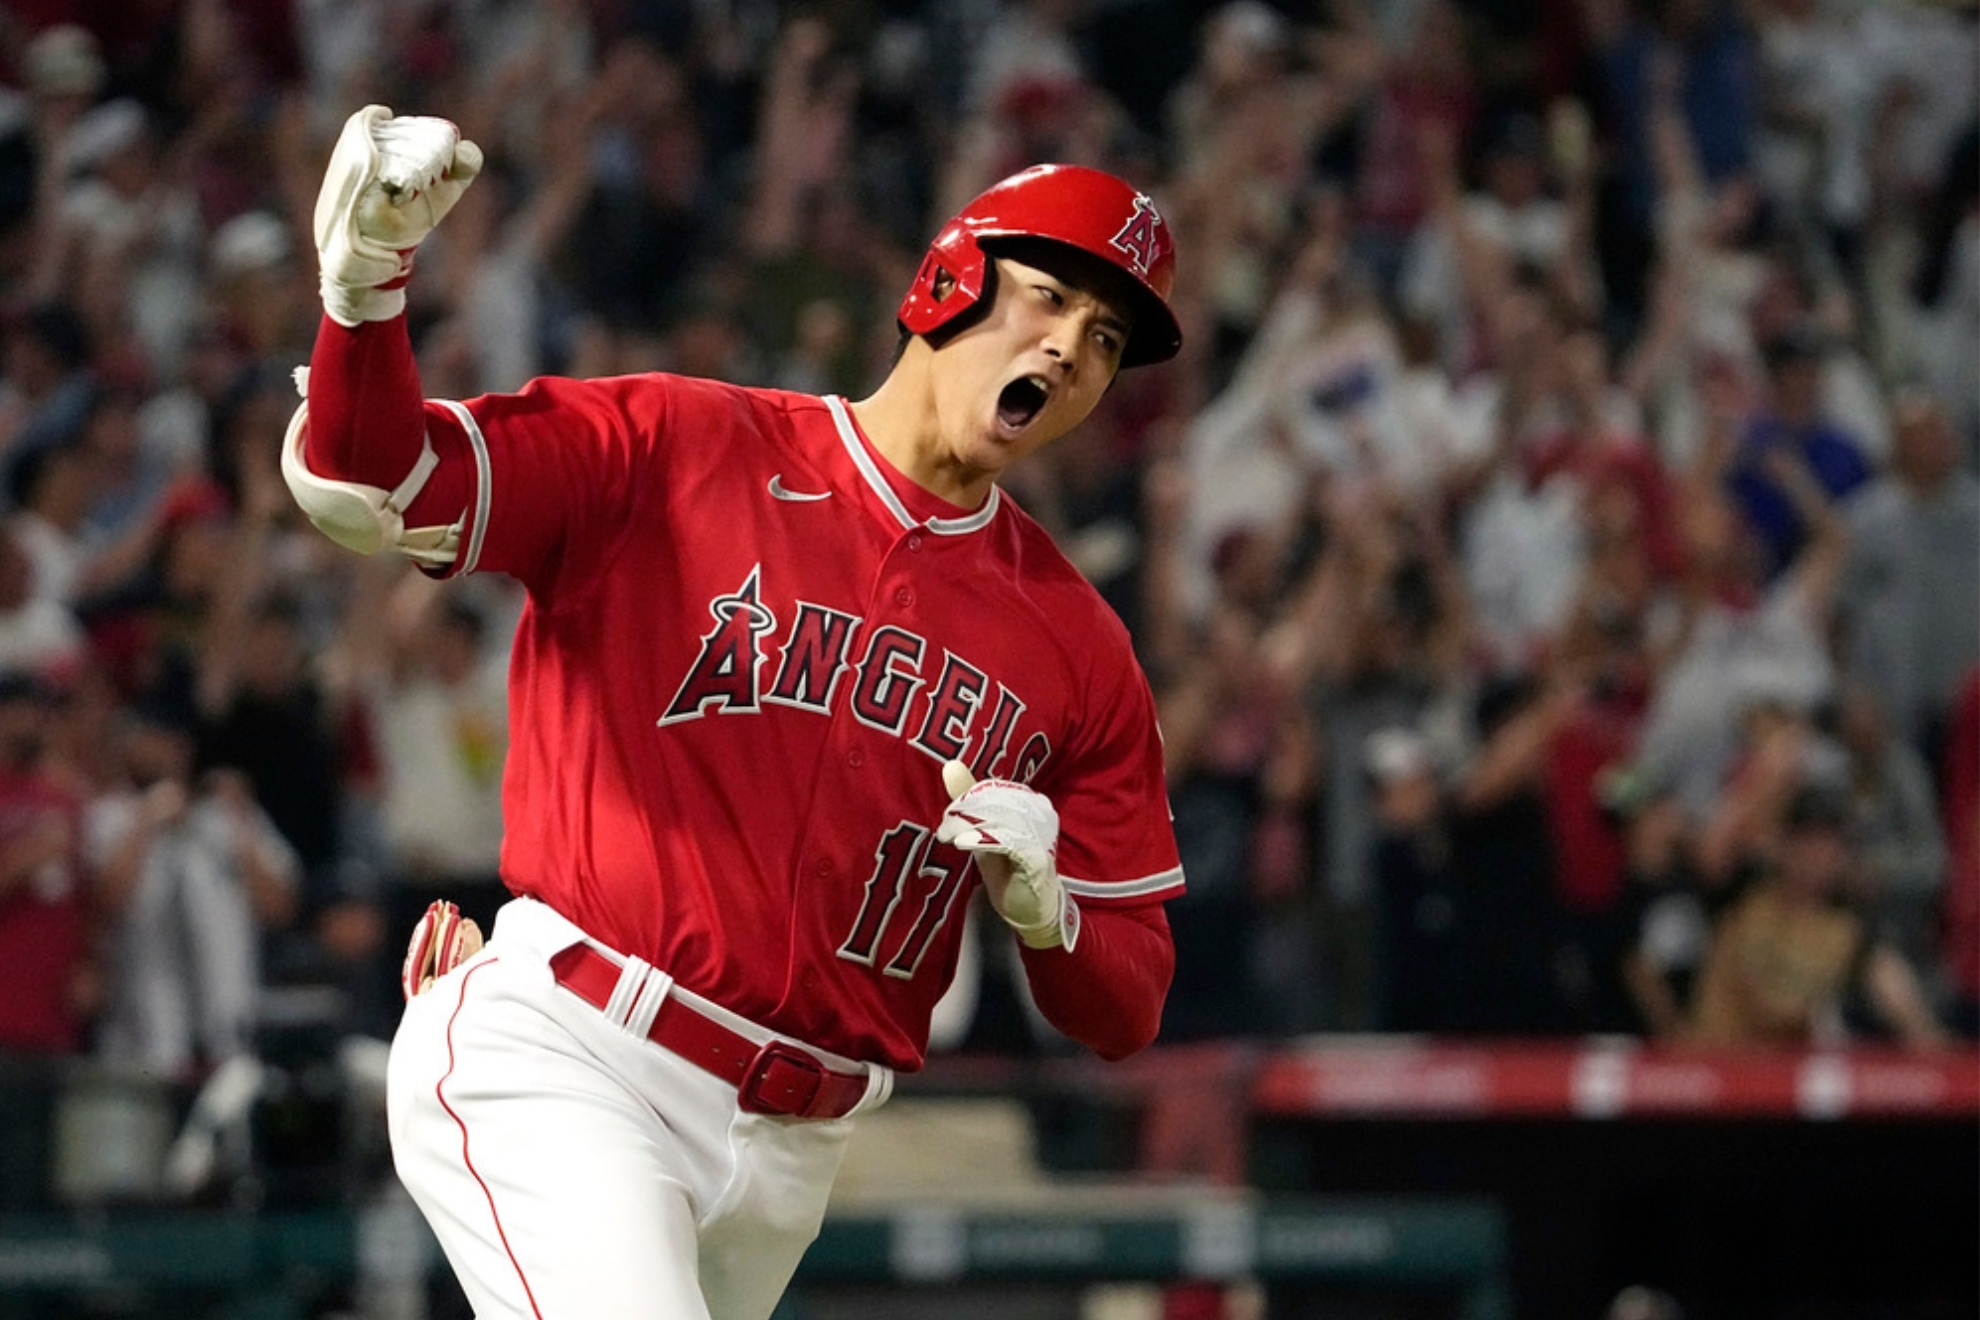 Ohtani will now boast the most lucrative contract in sports